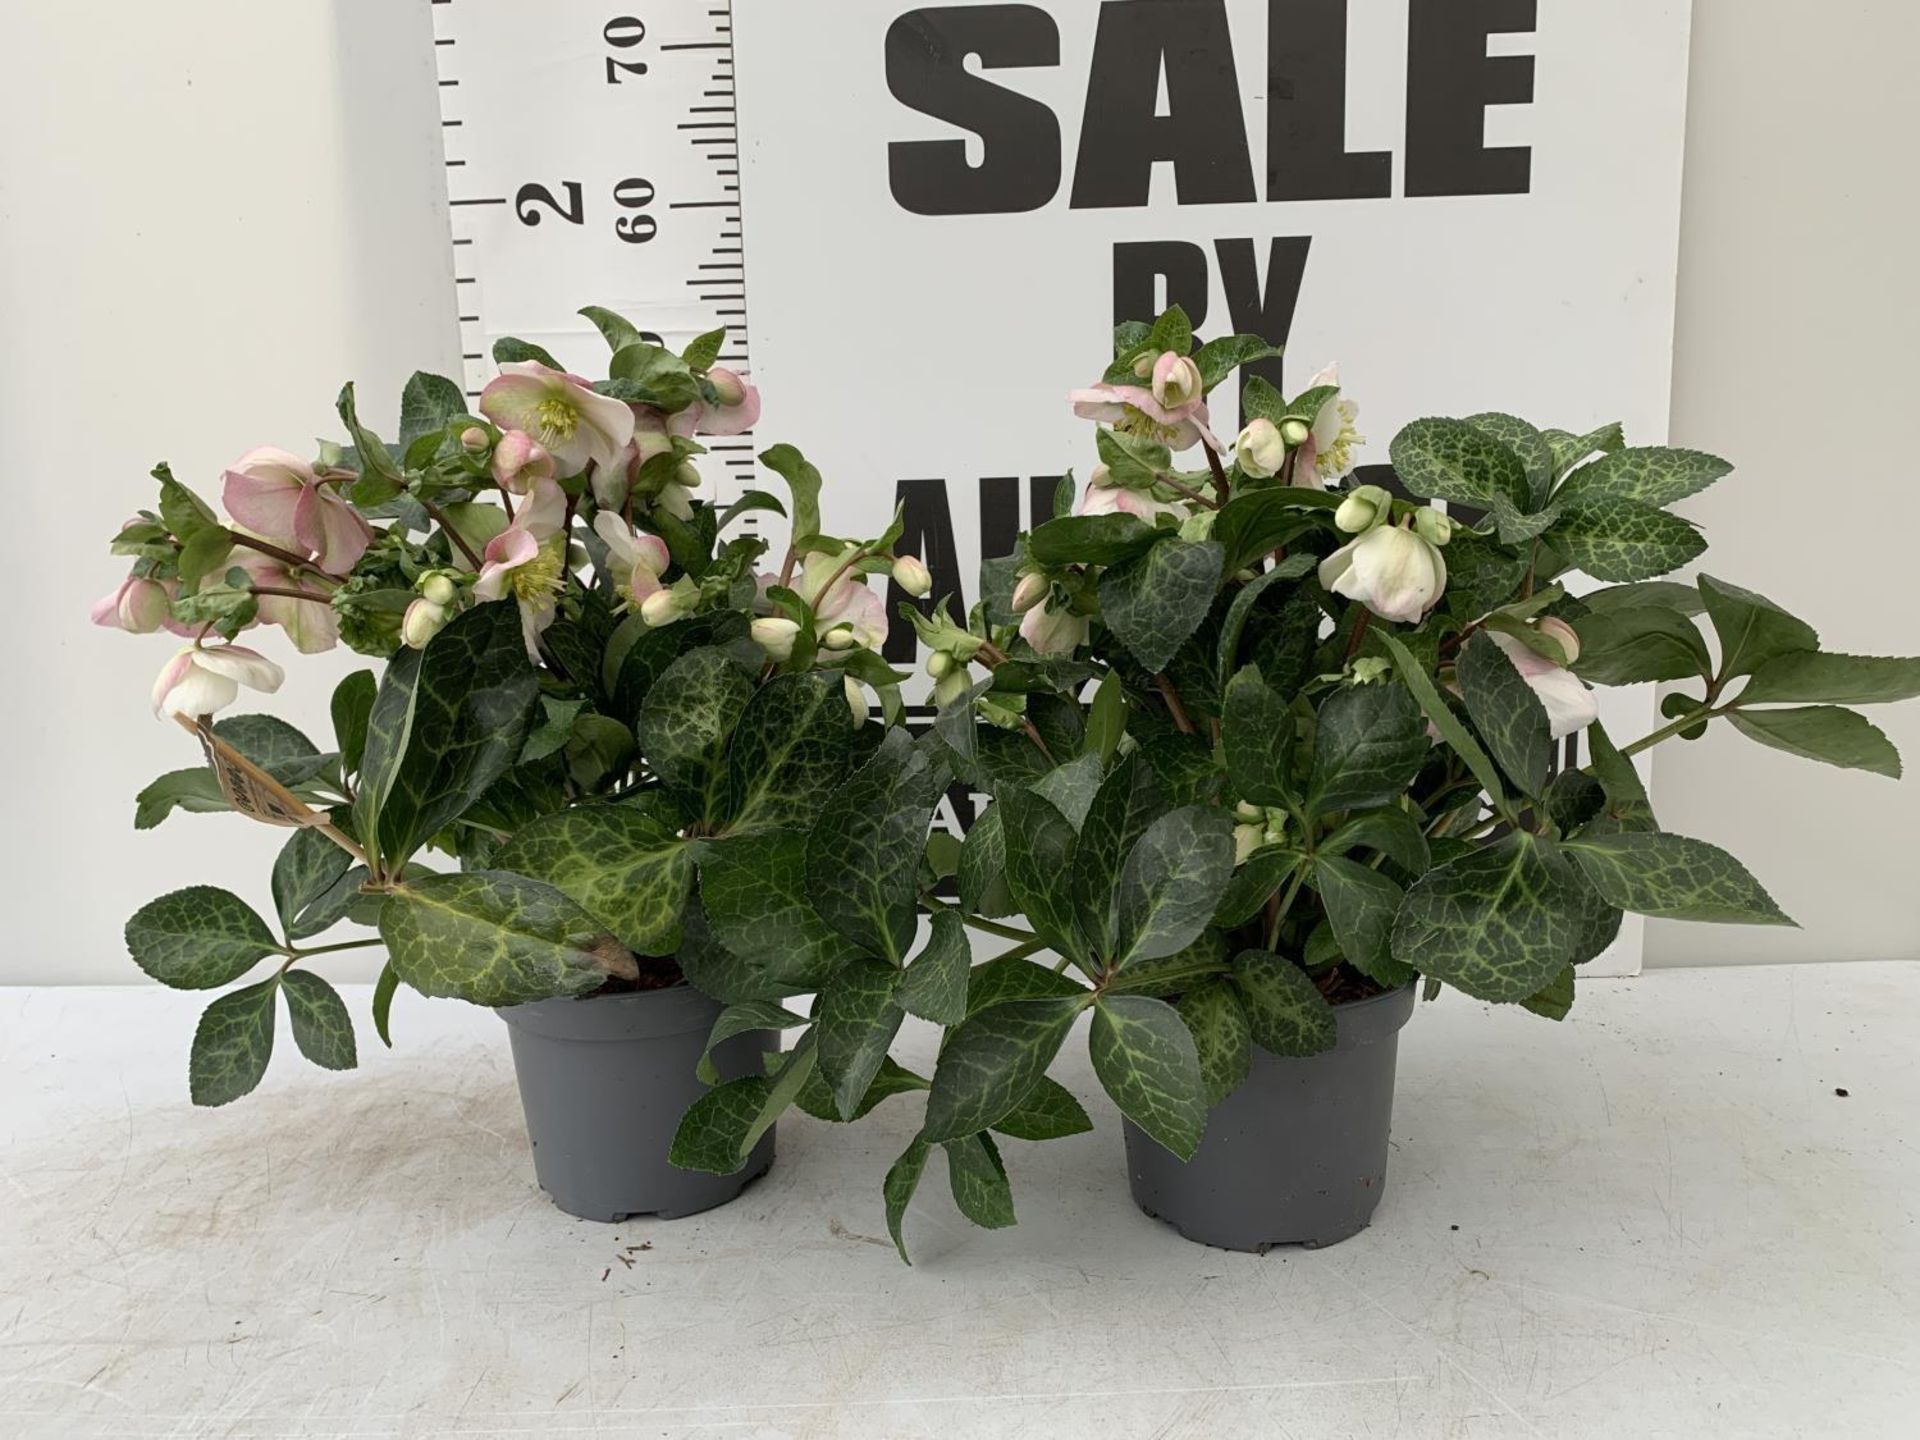 WELCOME TO ASHLEY WALLER HORTICULTURE AUCTION - LOTS ARE BEING ADDED DAILY - THE IMAGES SHOW LOTS - Image 14 of 19